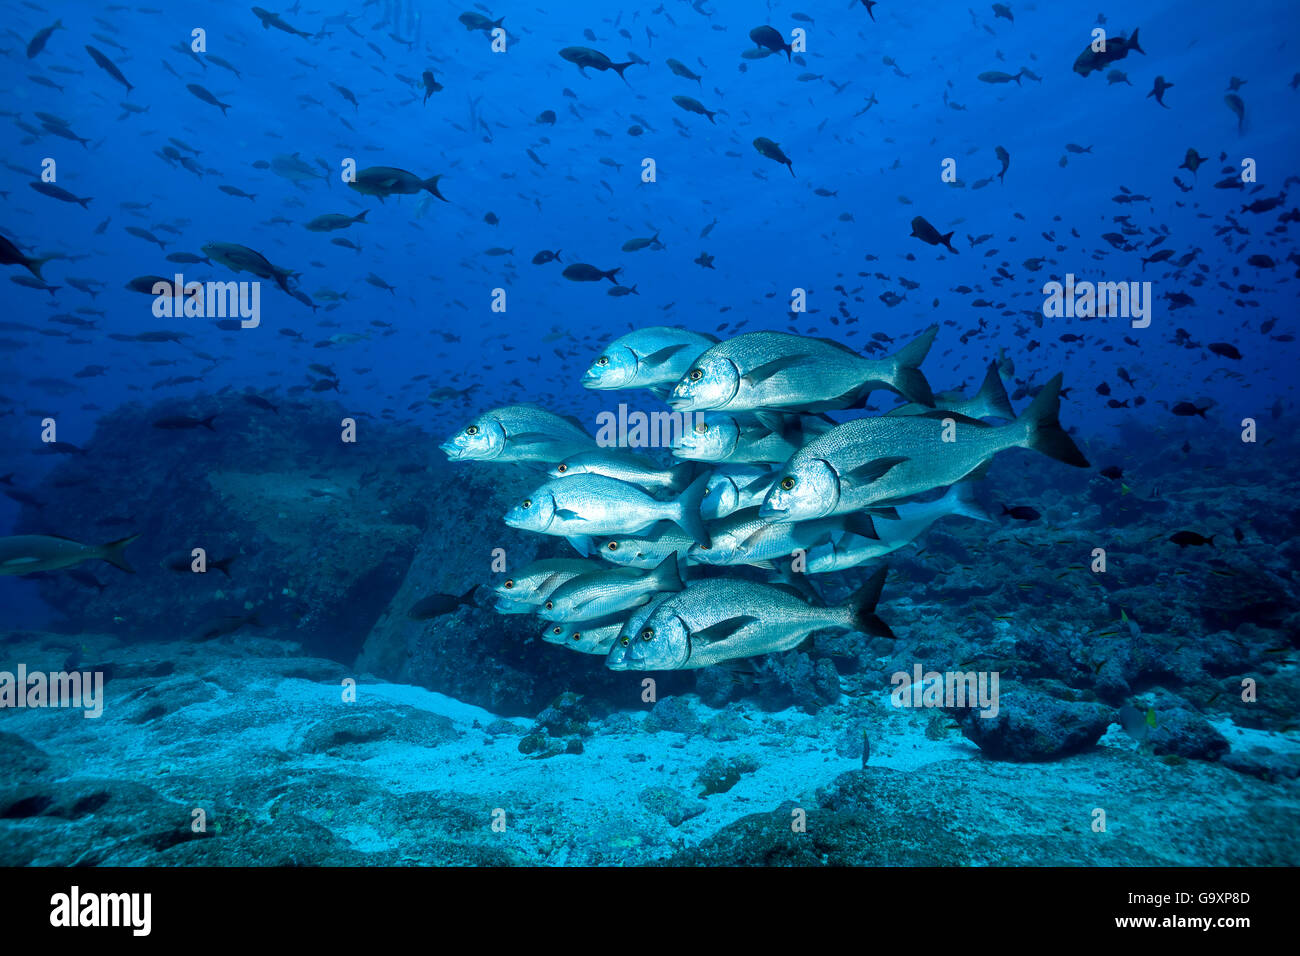 Shoal of Galapagos grunt (Orthopristis forbesi) Galapagos Islands, East Pacific Ocean. Stock Photo